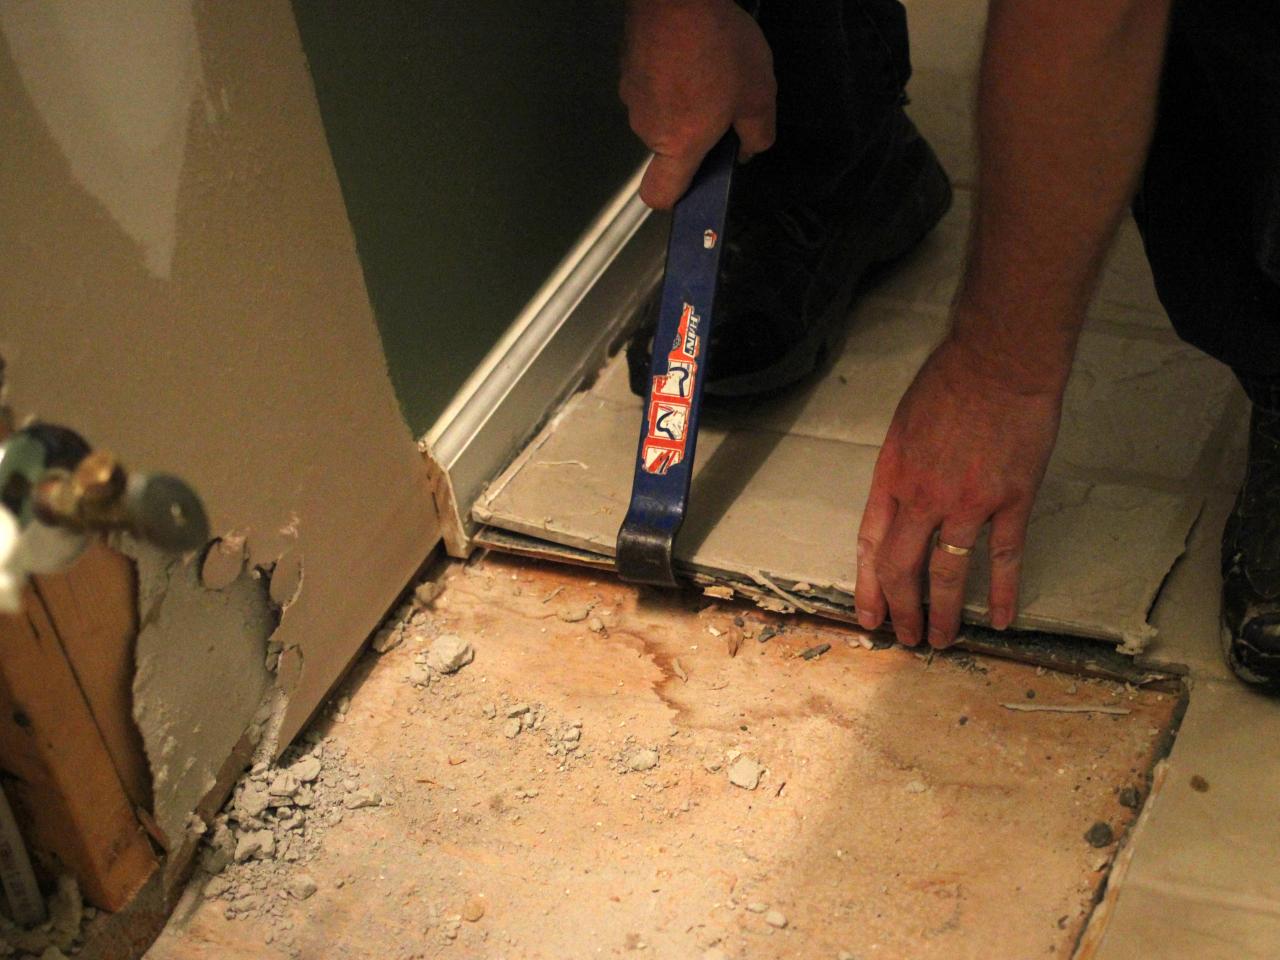 How To Remove A Tile Floor, Easiest Way To Remove Ceramic Tile From Concrete Floor